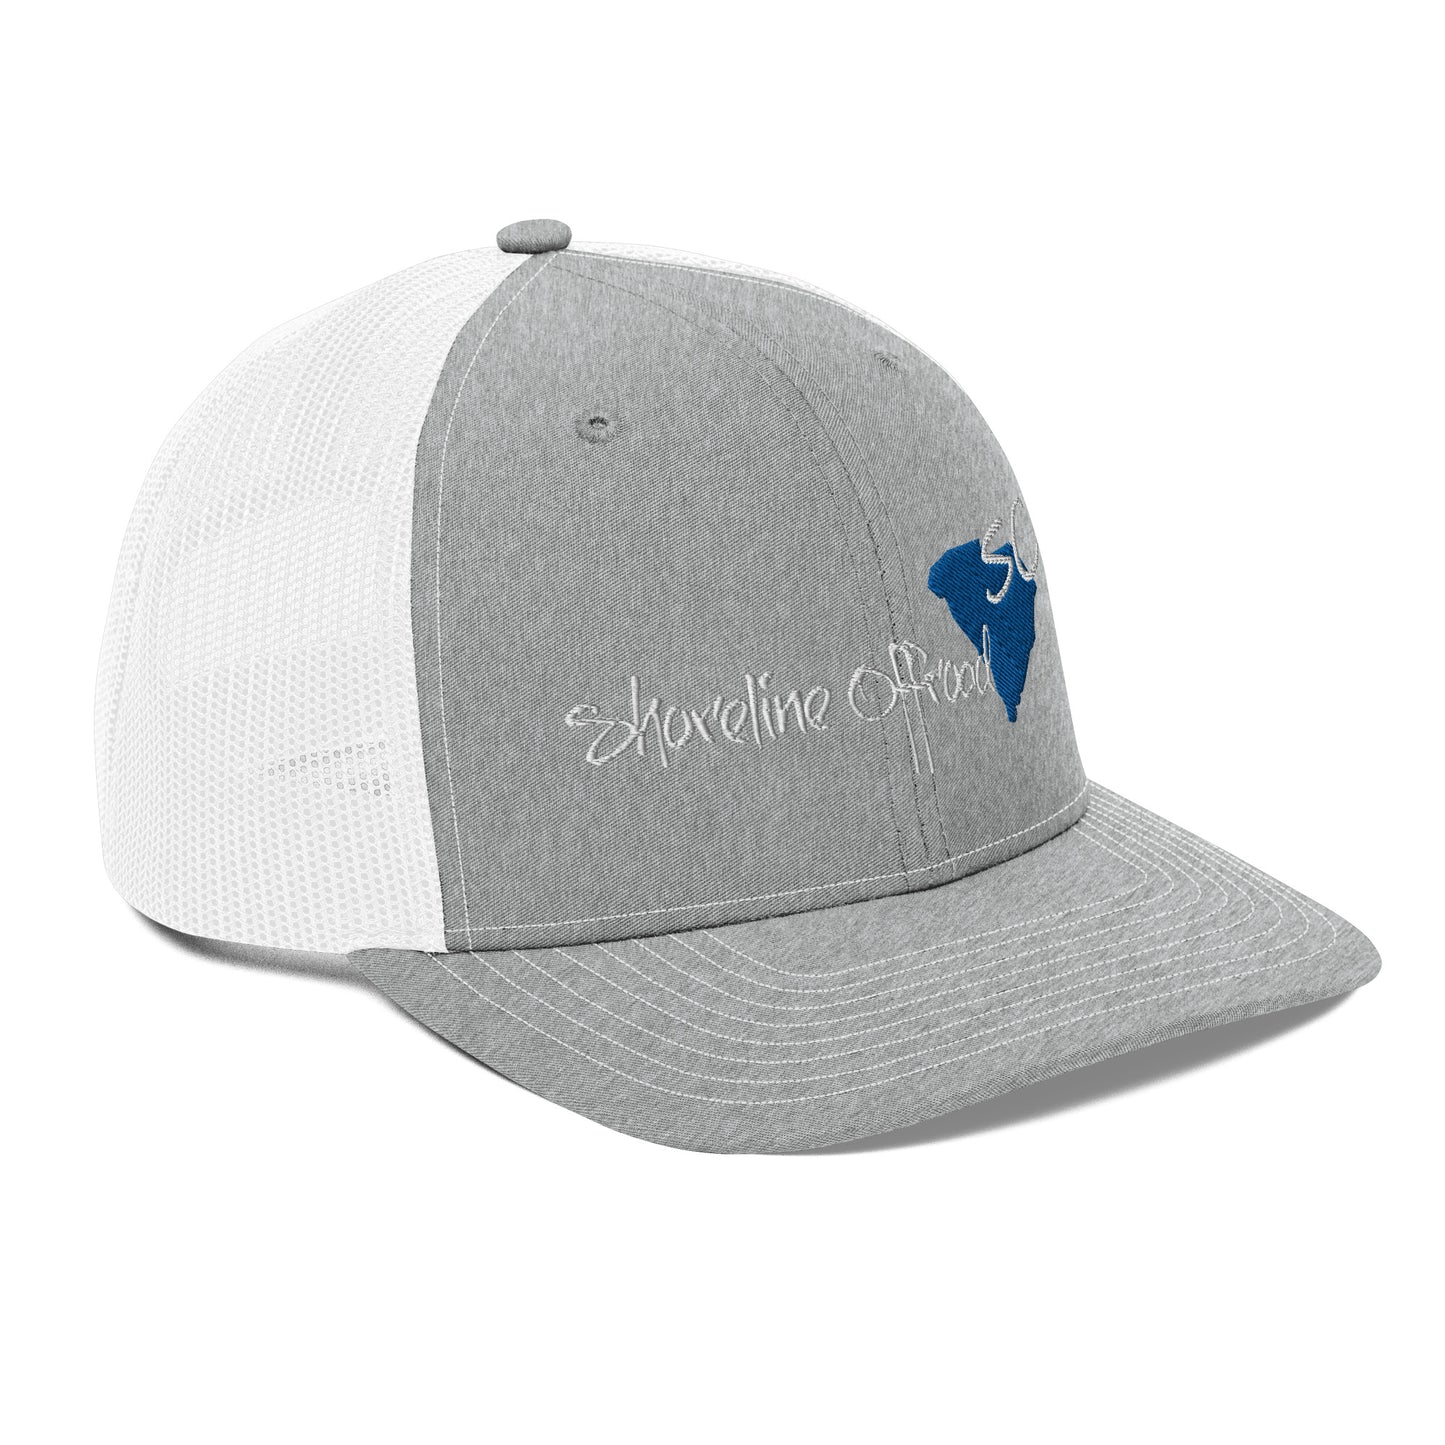 a gray and white trucker hat with a blue bull embroidered on the front